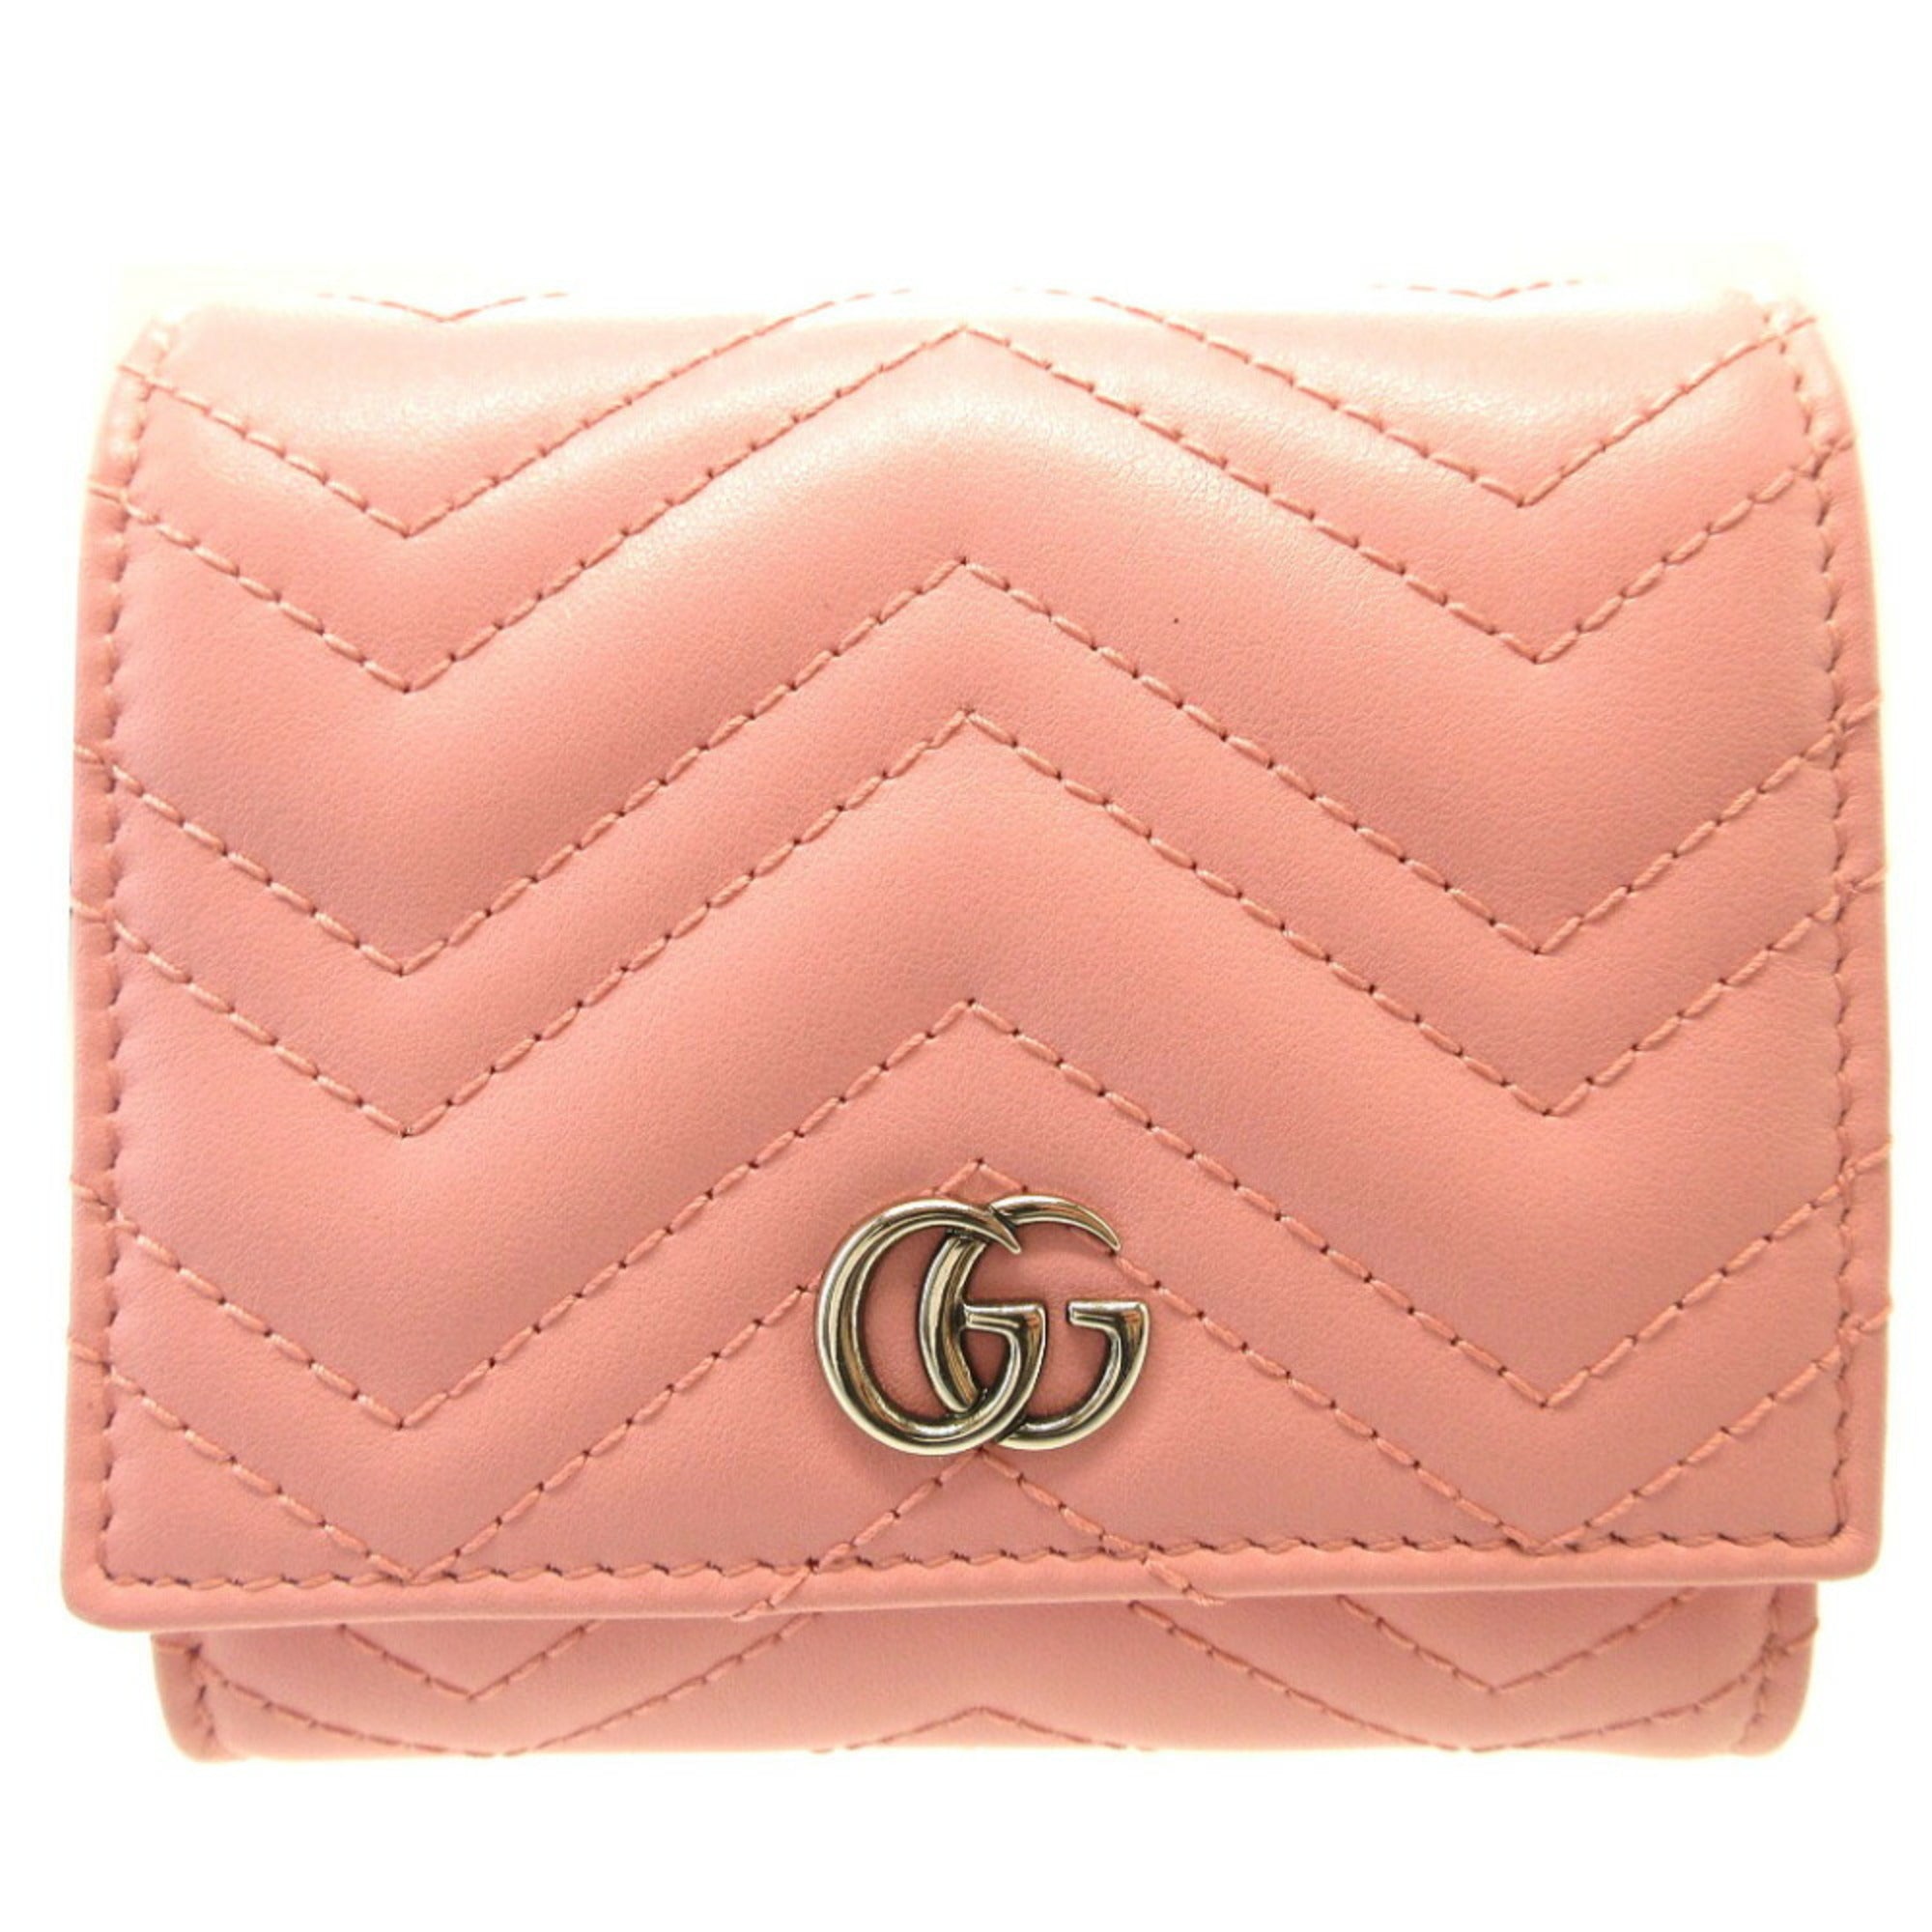 Gucci Taupe Mini Gg Marmont 2.0 Camera Bag In Nude & Neutrals | ModeSens |  Bags, Gucci handbags pink, Shoulder bag